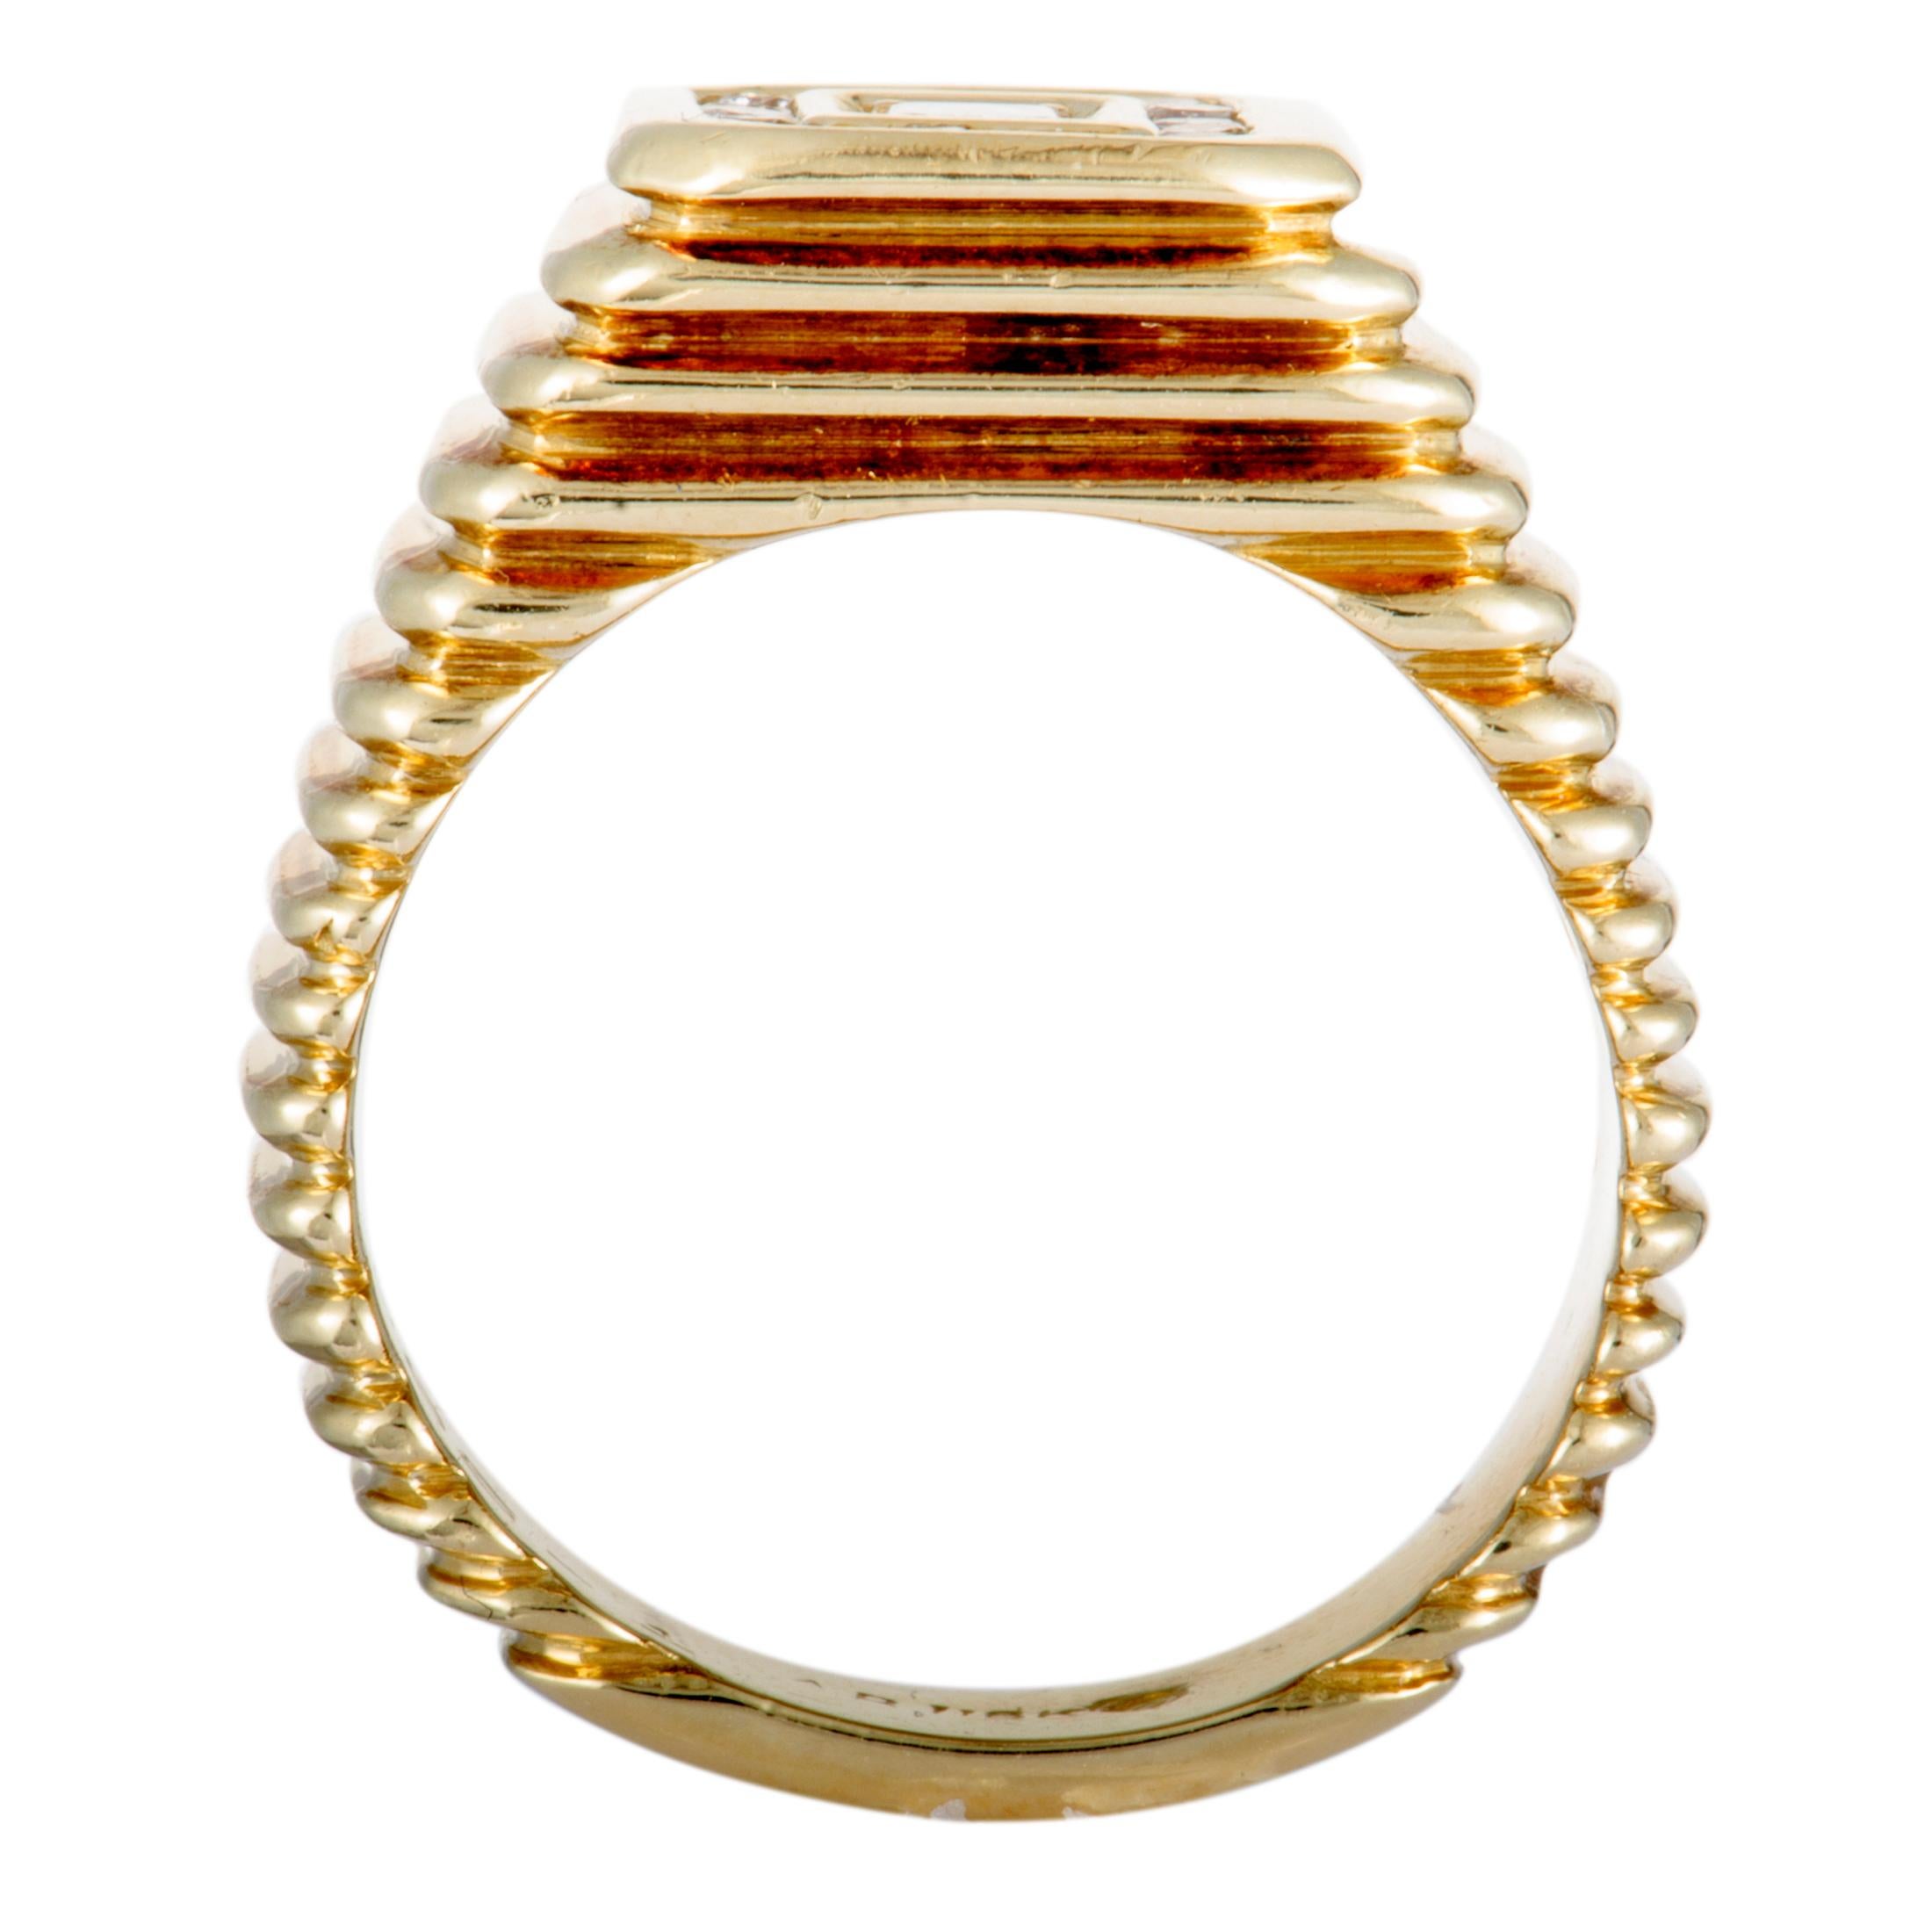 This superb piece from Van Cleef & Arpels boasts a stunningly refined design, offering a look of absolute prestige and sophistication. Expertly crafted from luxurious 18K yellow gold, the ring is attractively decorated with colorless (grade F)